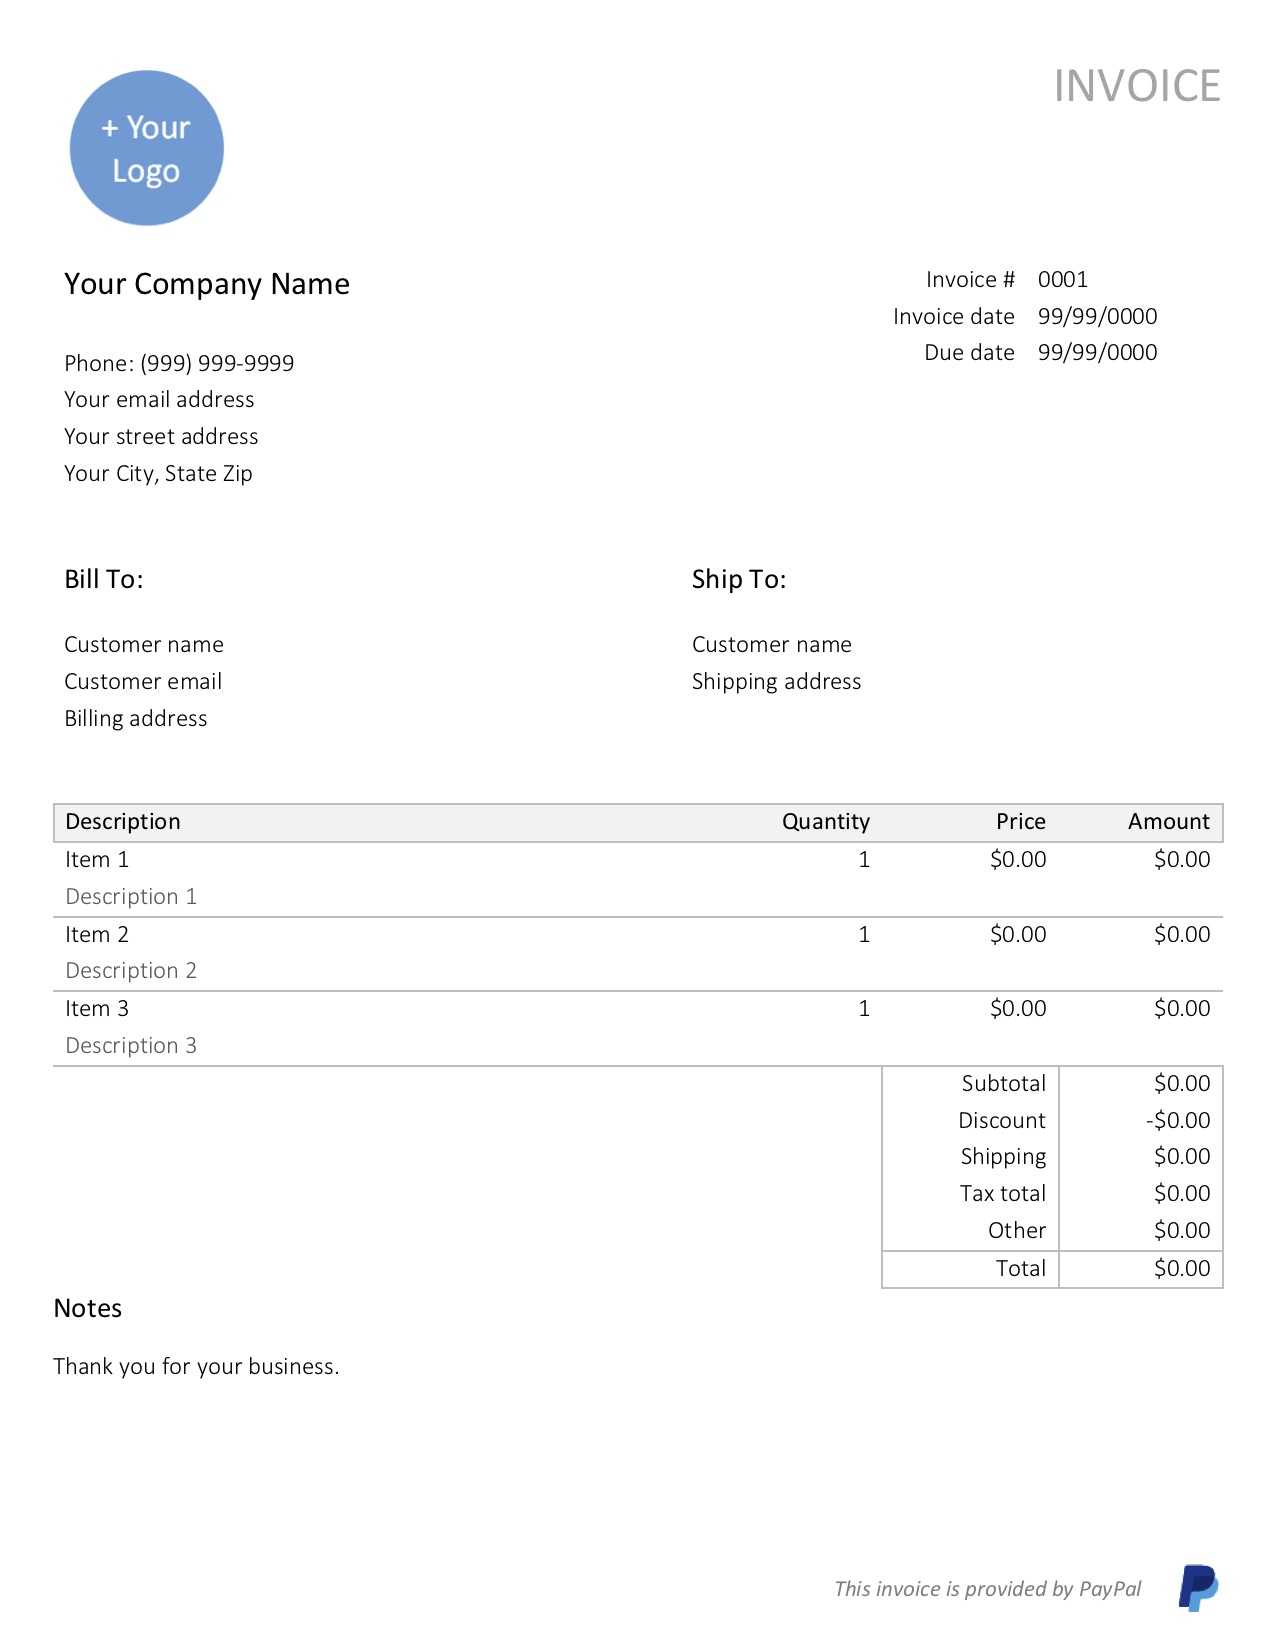 Free, Downloadable Sample Invoice Template | Paypal Within Free Downloadable Invoice Template For Word